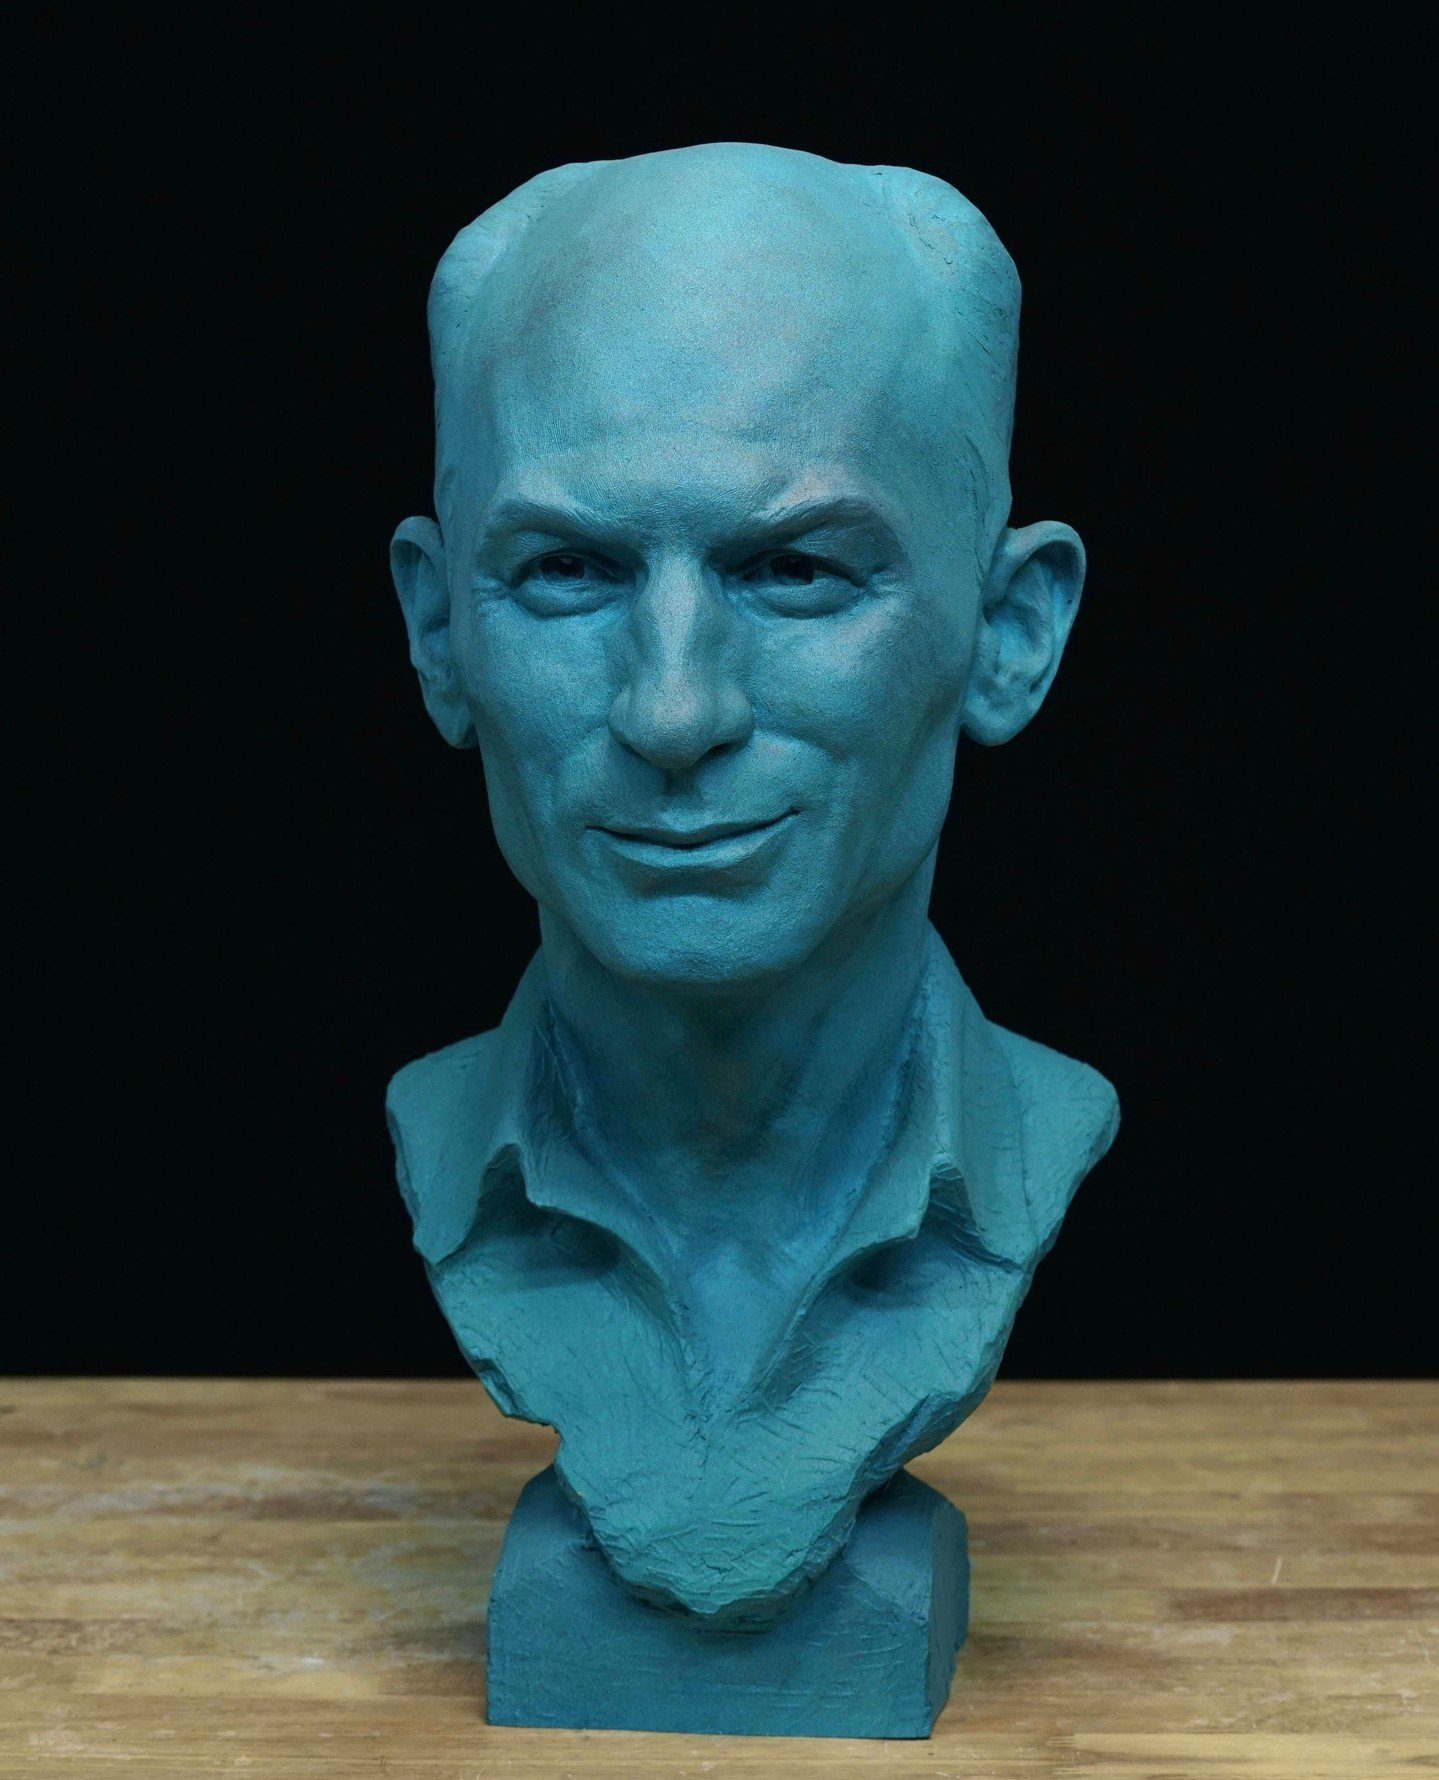 &quot;Ernie Pyle&quot; is a stunning sculpture by May 2023 Edition Winner of the Monthly Art Award, Quintin McCann 👁️🖌️⁠
⁠
Double-tap and show some love! ❤️😍⁠
⁠
#sculpture #artist #boynesartistaward #artaward